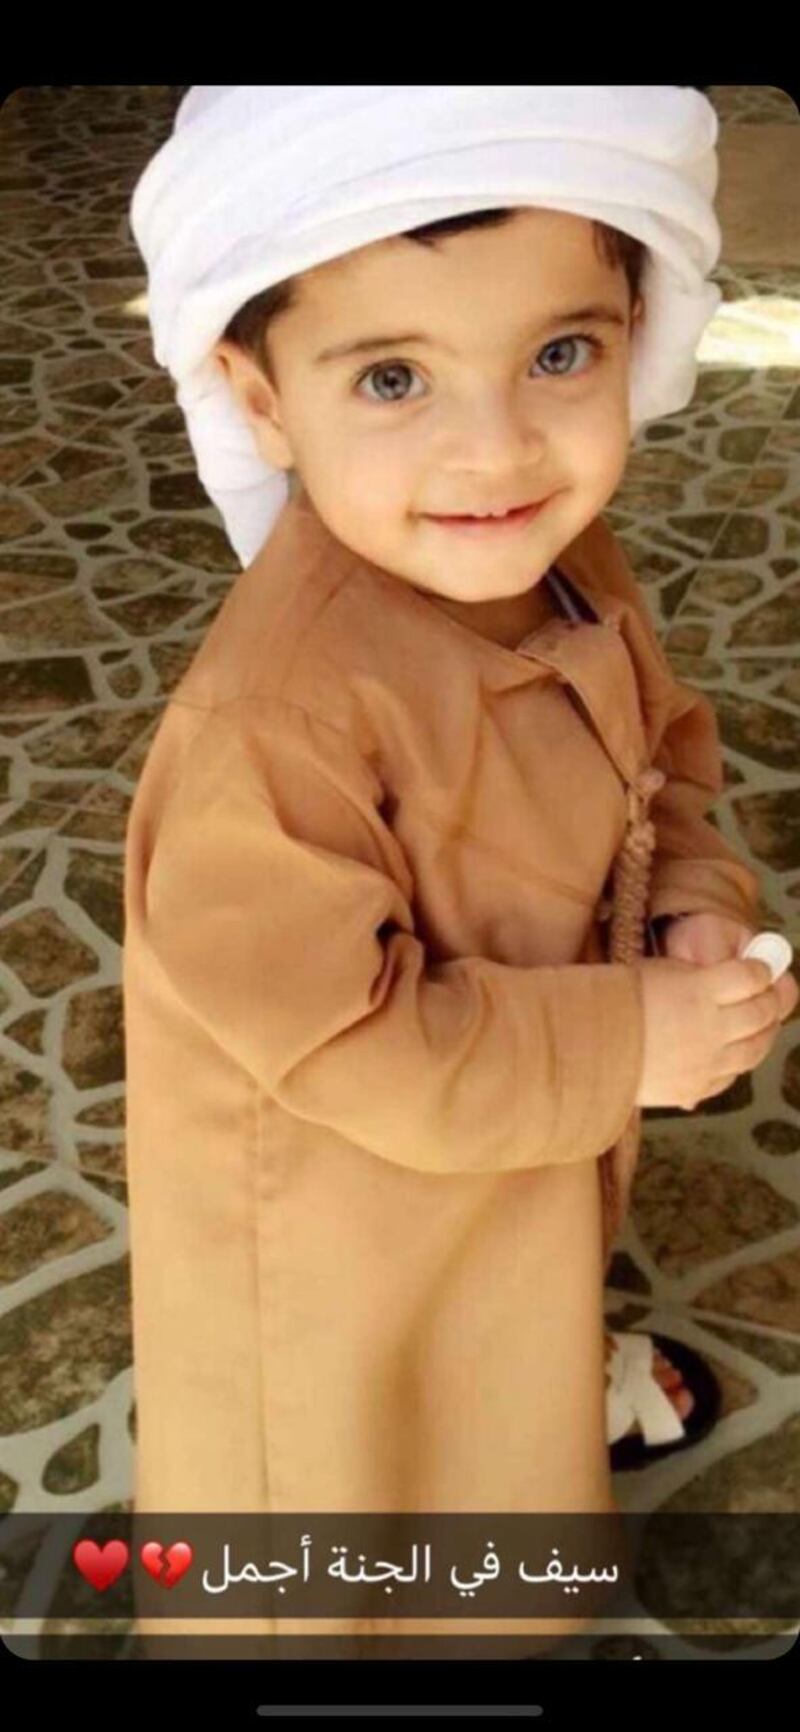 Saif Al Hassani, 2, drowns in hotel pool in Kuwait. Courtesy family